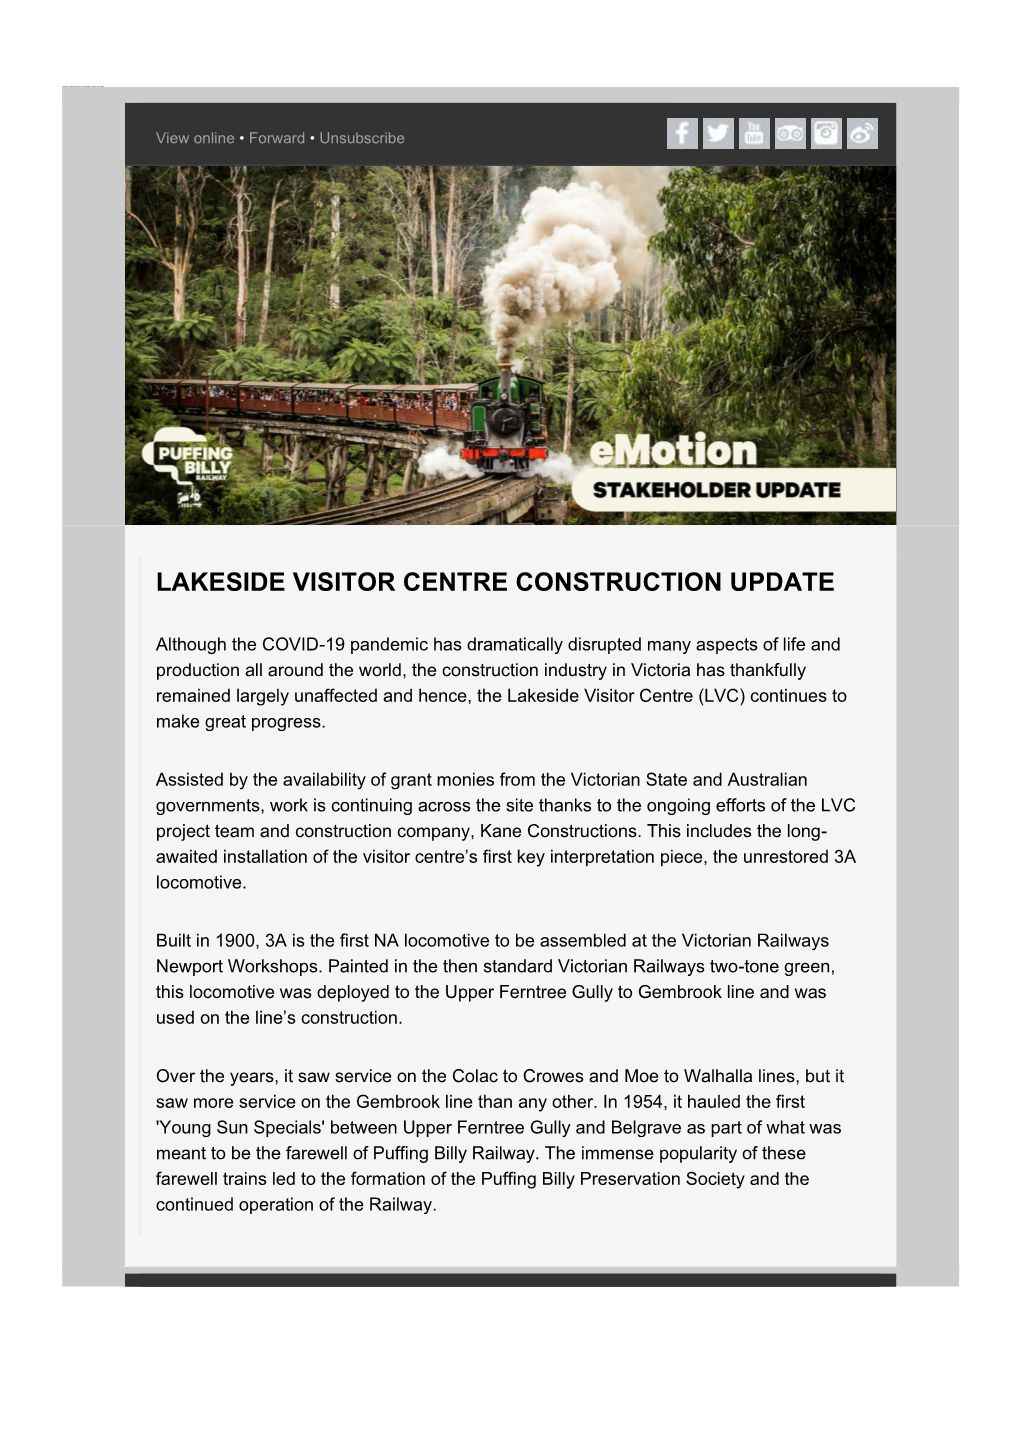 Lakeside Visitor Centre Construction Update